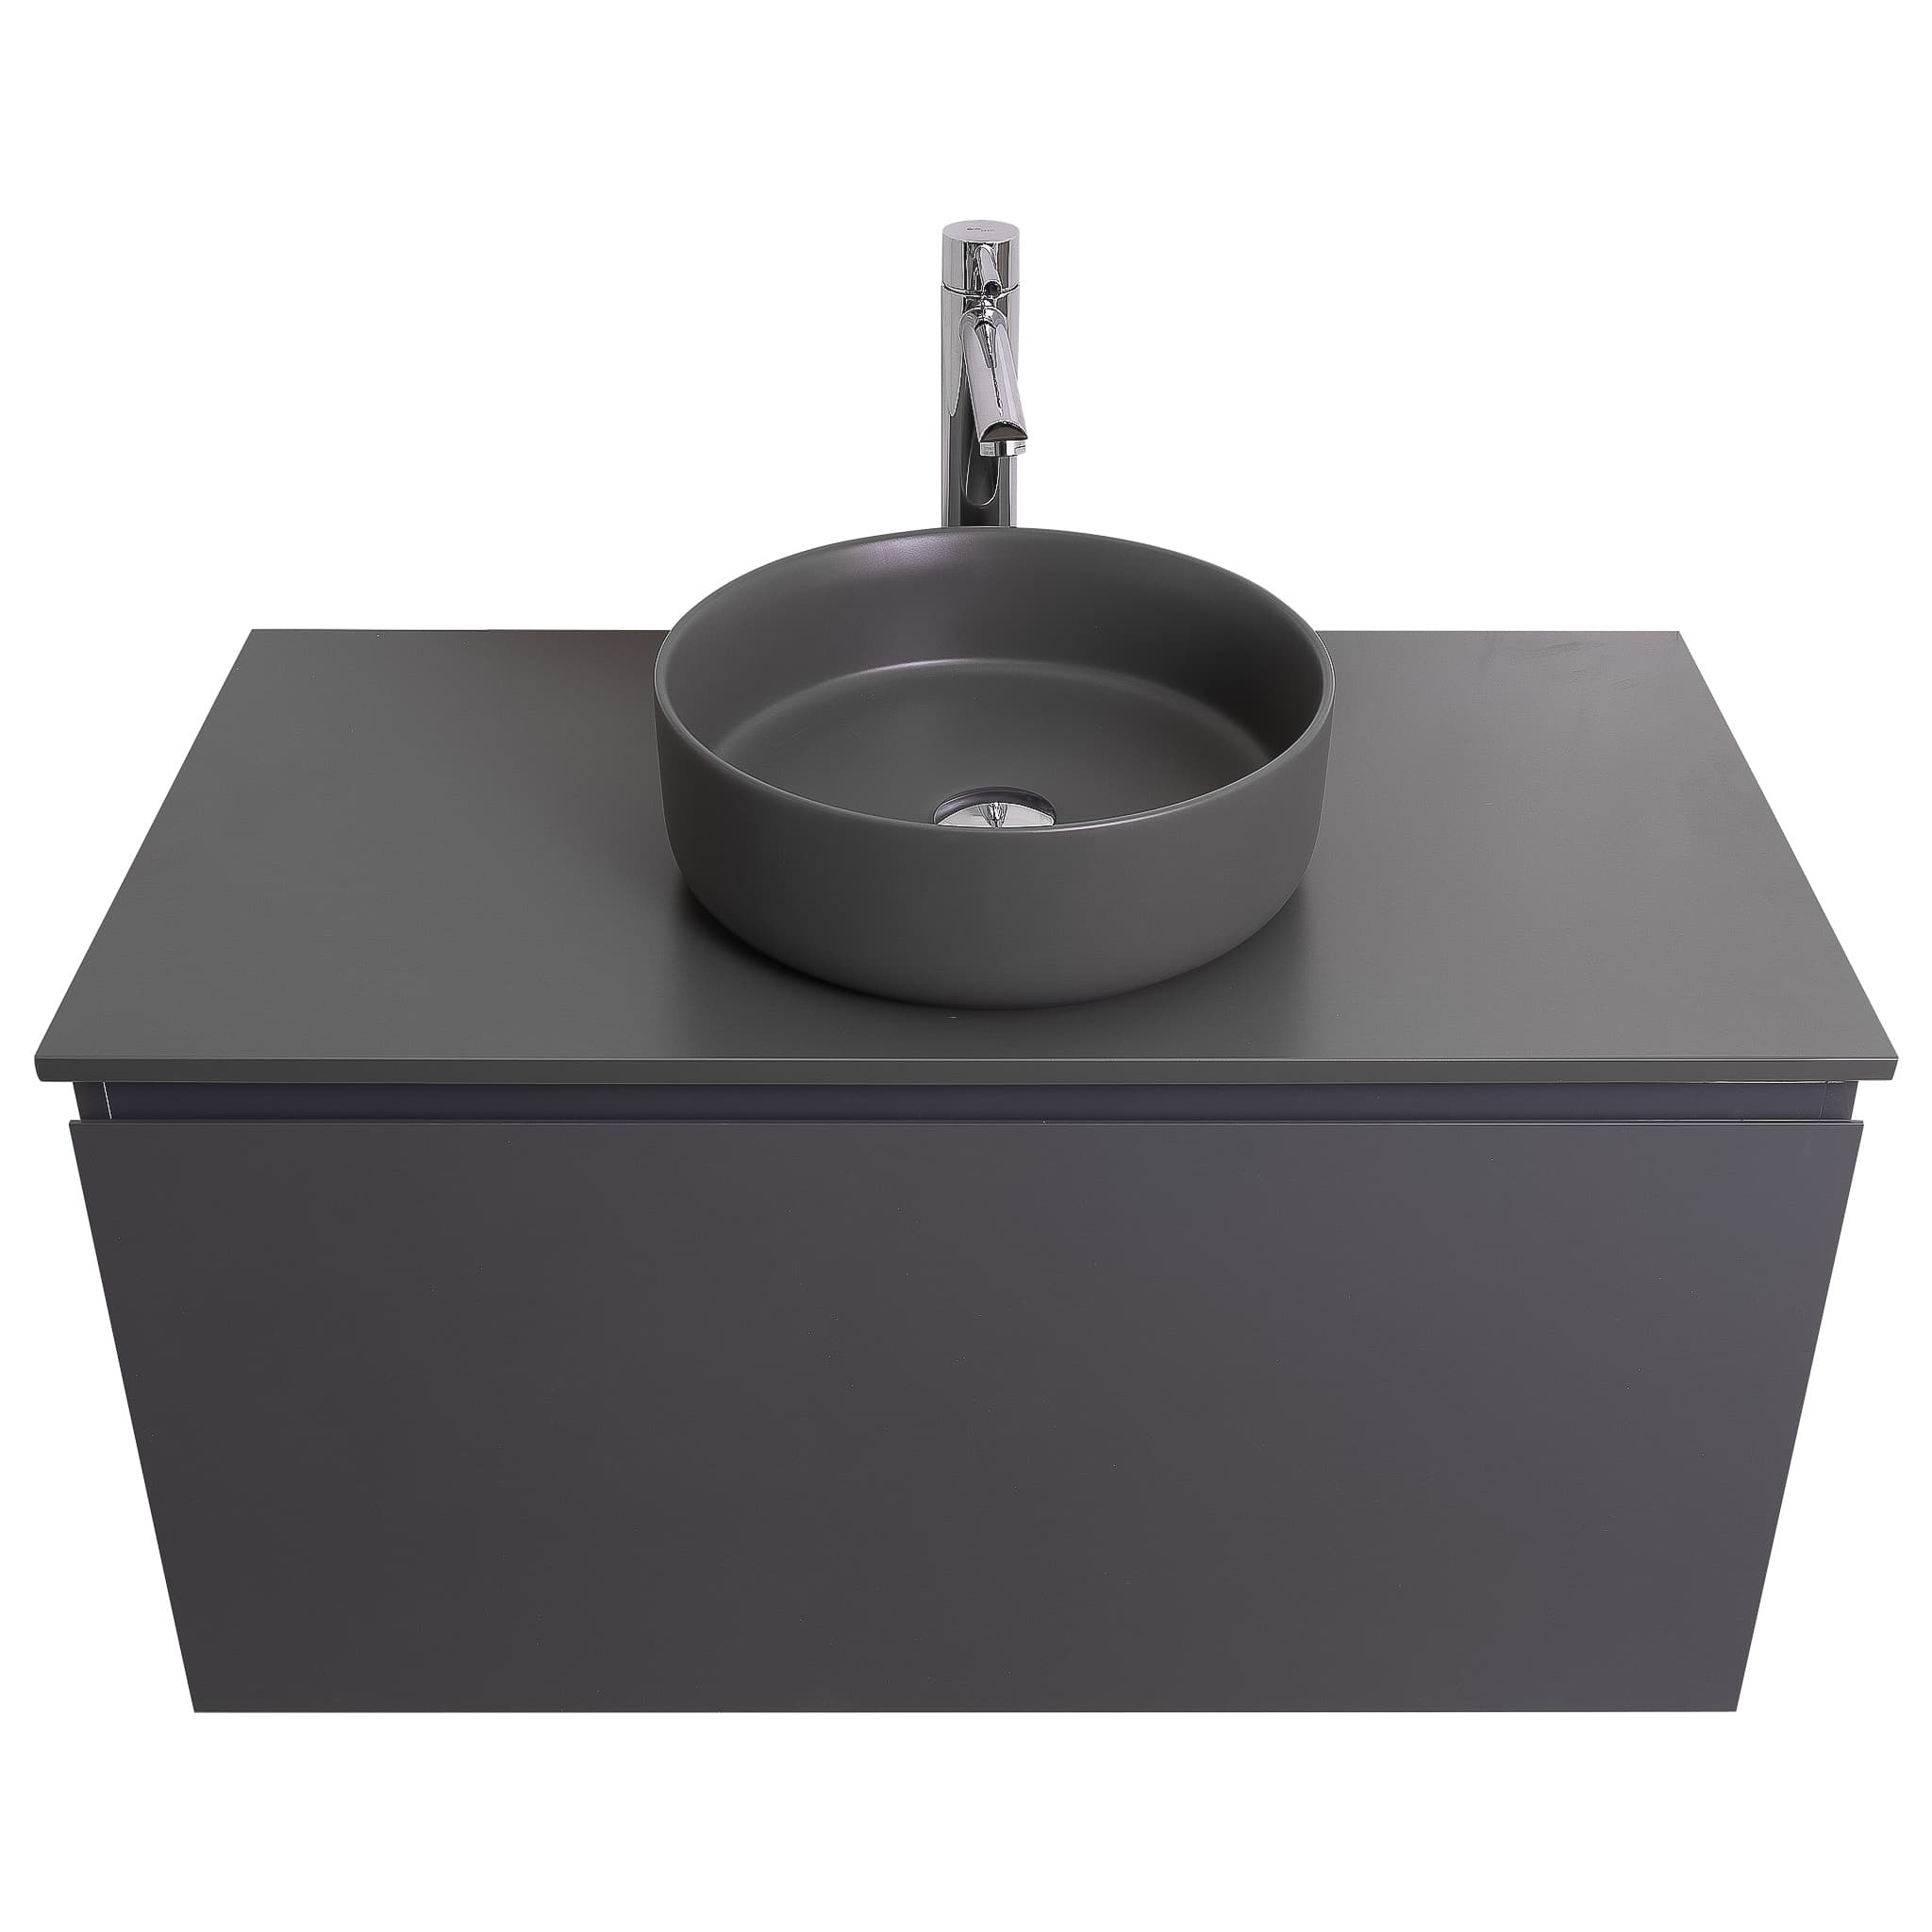 Venice 39.5 Anthracite High Gloss Cabinet, Ares Grey Ceniza Top And Ares Grey Ceniza Ceramic Basin, Wall Mounted Modern Vanity Set